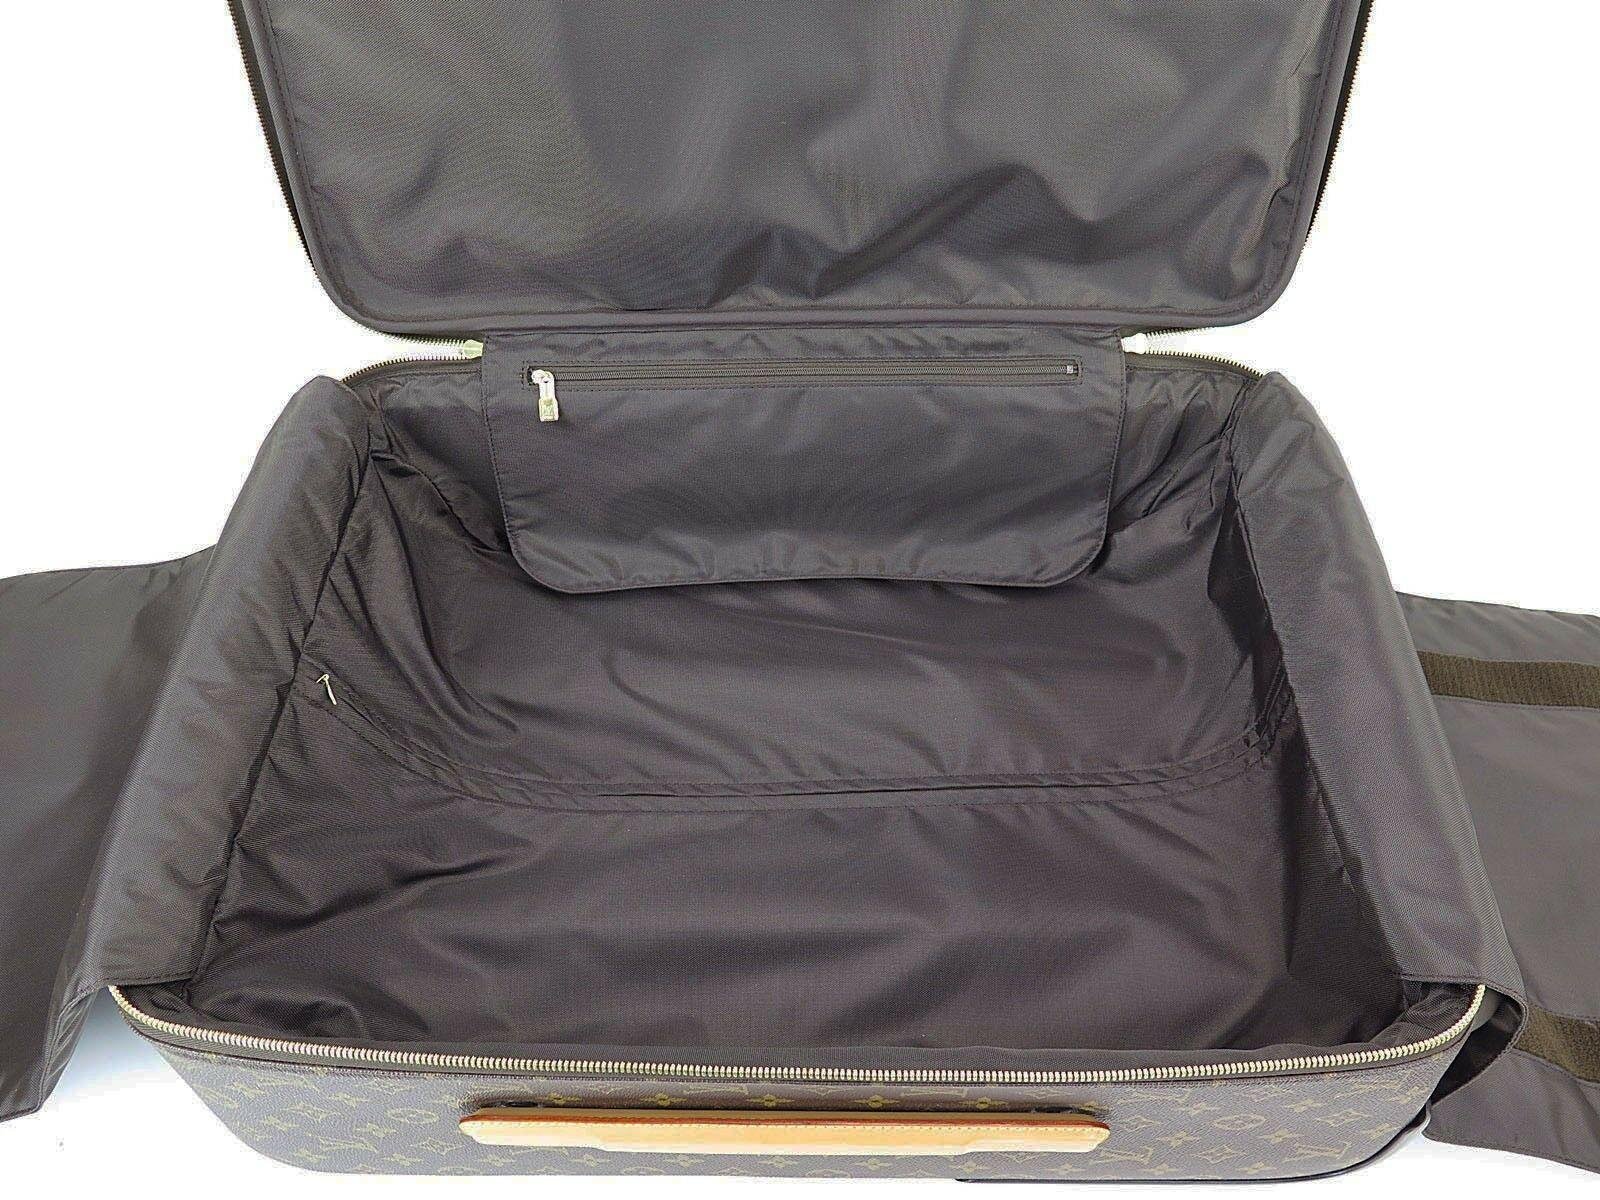               Pegase 55 Business Monogram Travel Rolling Suitcase #30667     ags 4